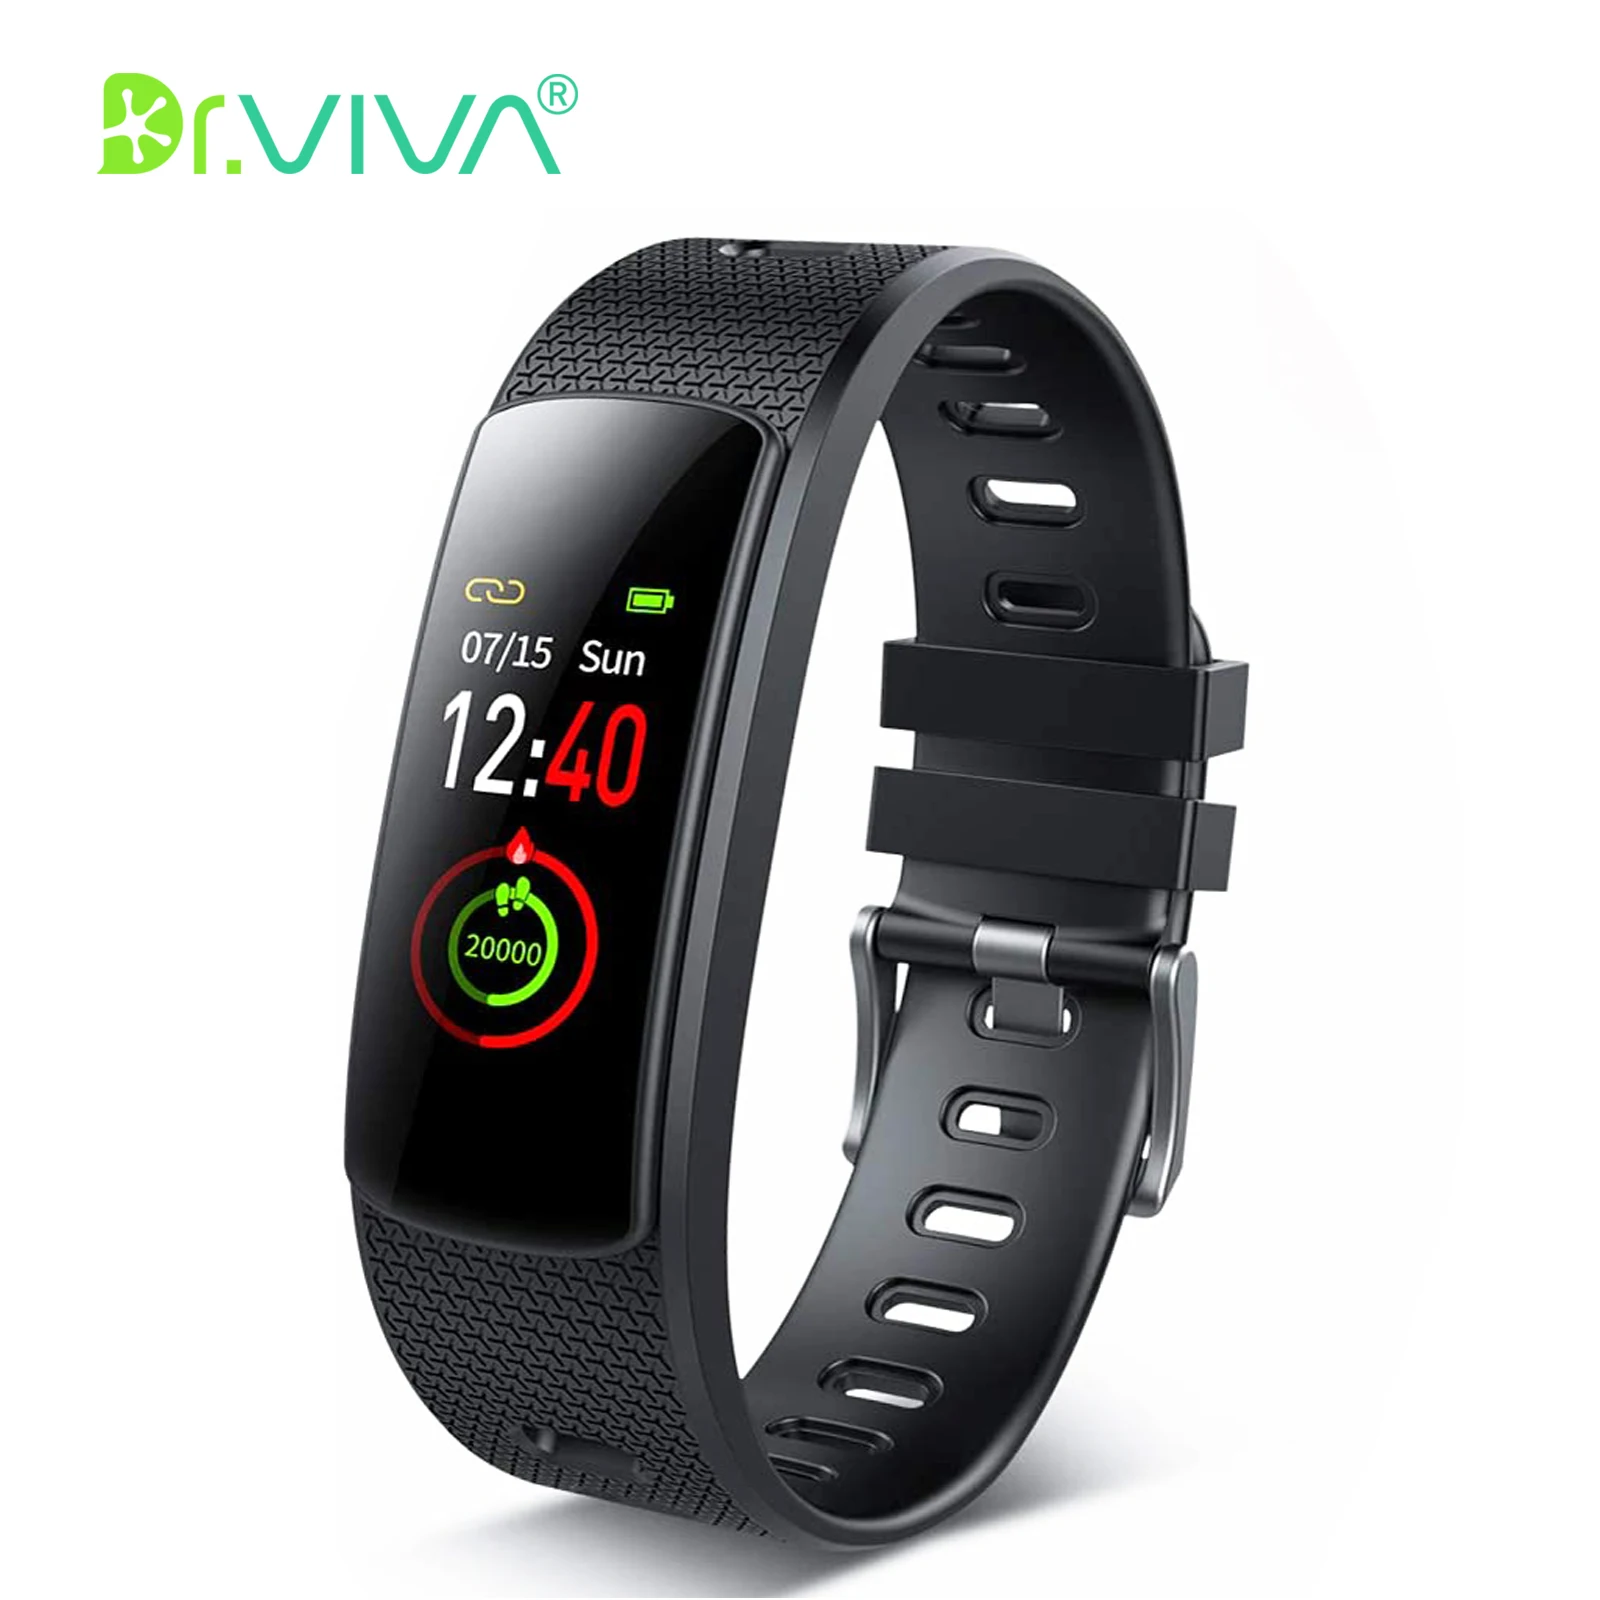 

DR.VIVA Smart Watch Band Fitness Activity Tracker 24H Heart Rate Sleep Monitor 7 Sports Modes 7-Day Battery IP67 Waterproof